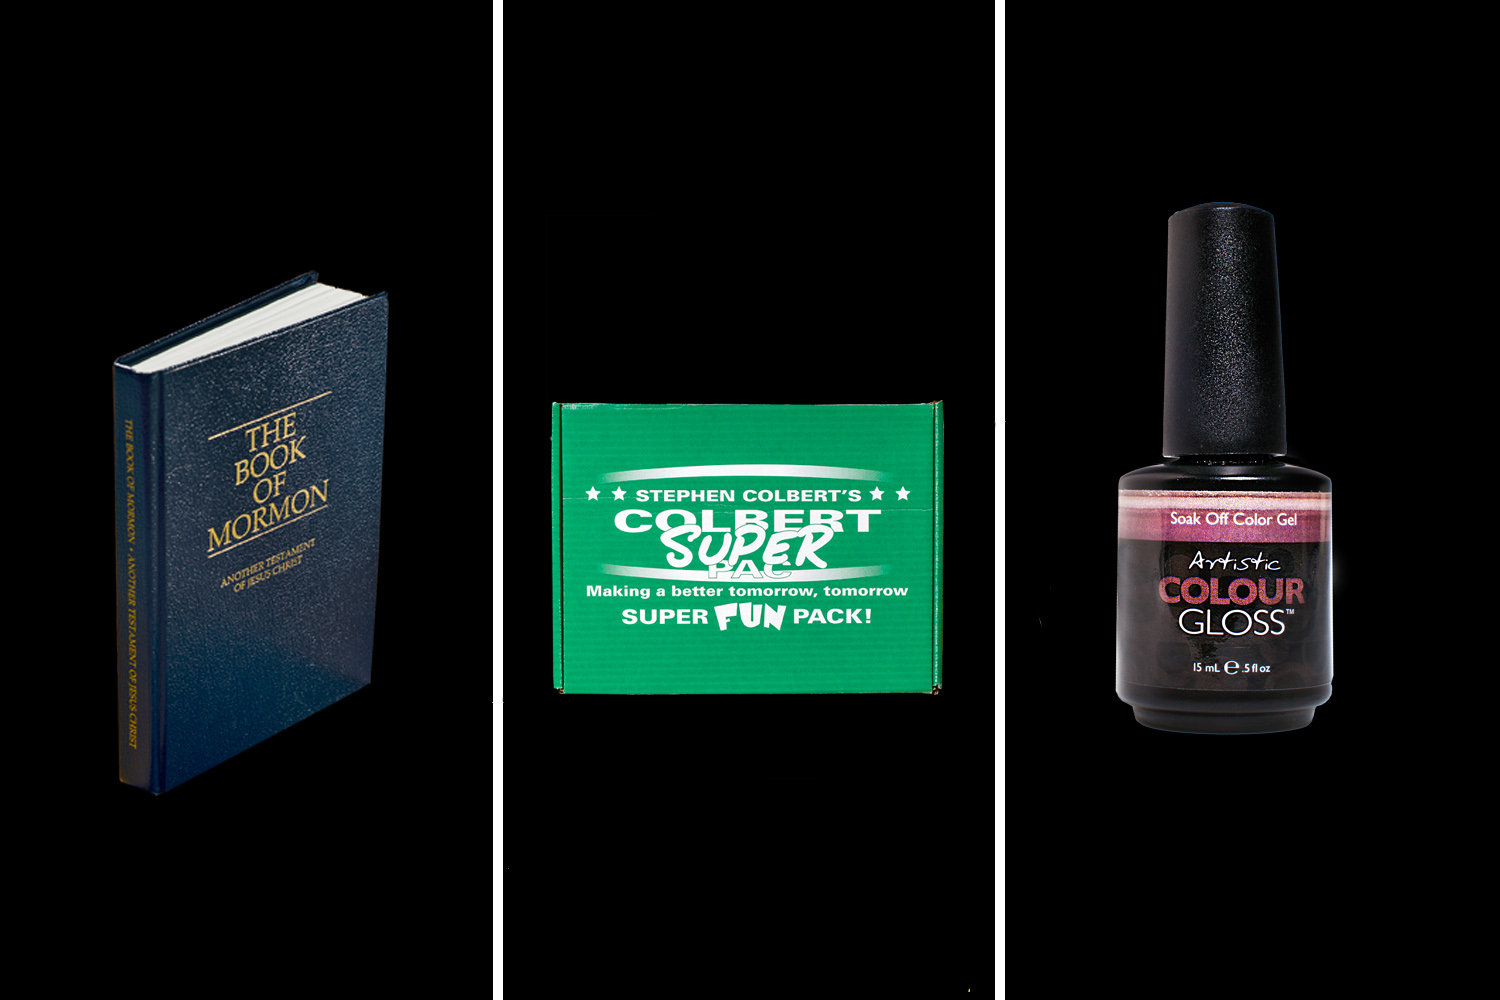 Image: Image: The Book of Mormon, Super PAC Fun Pack and Michelle Obama's Nail Polish